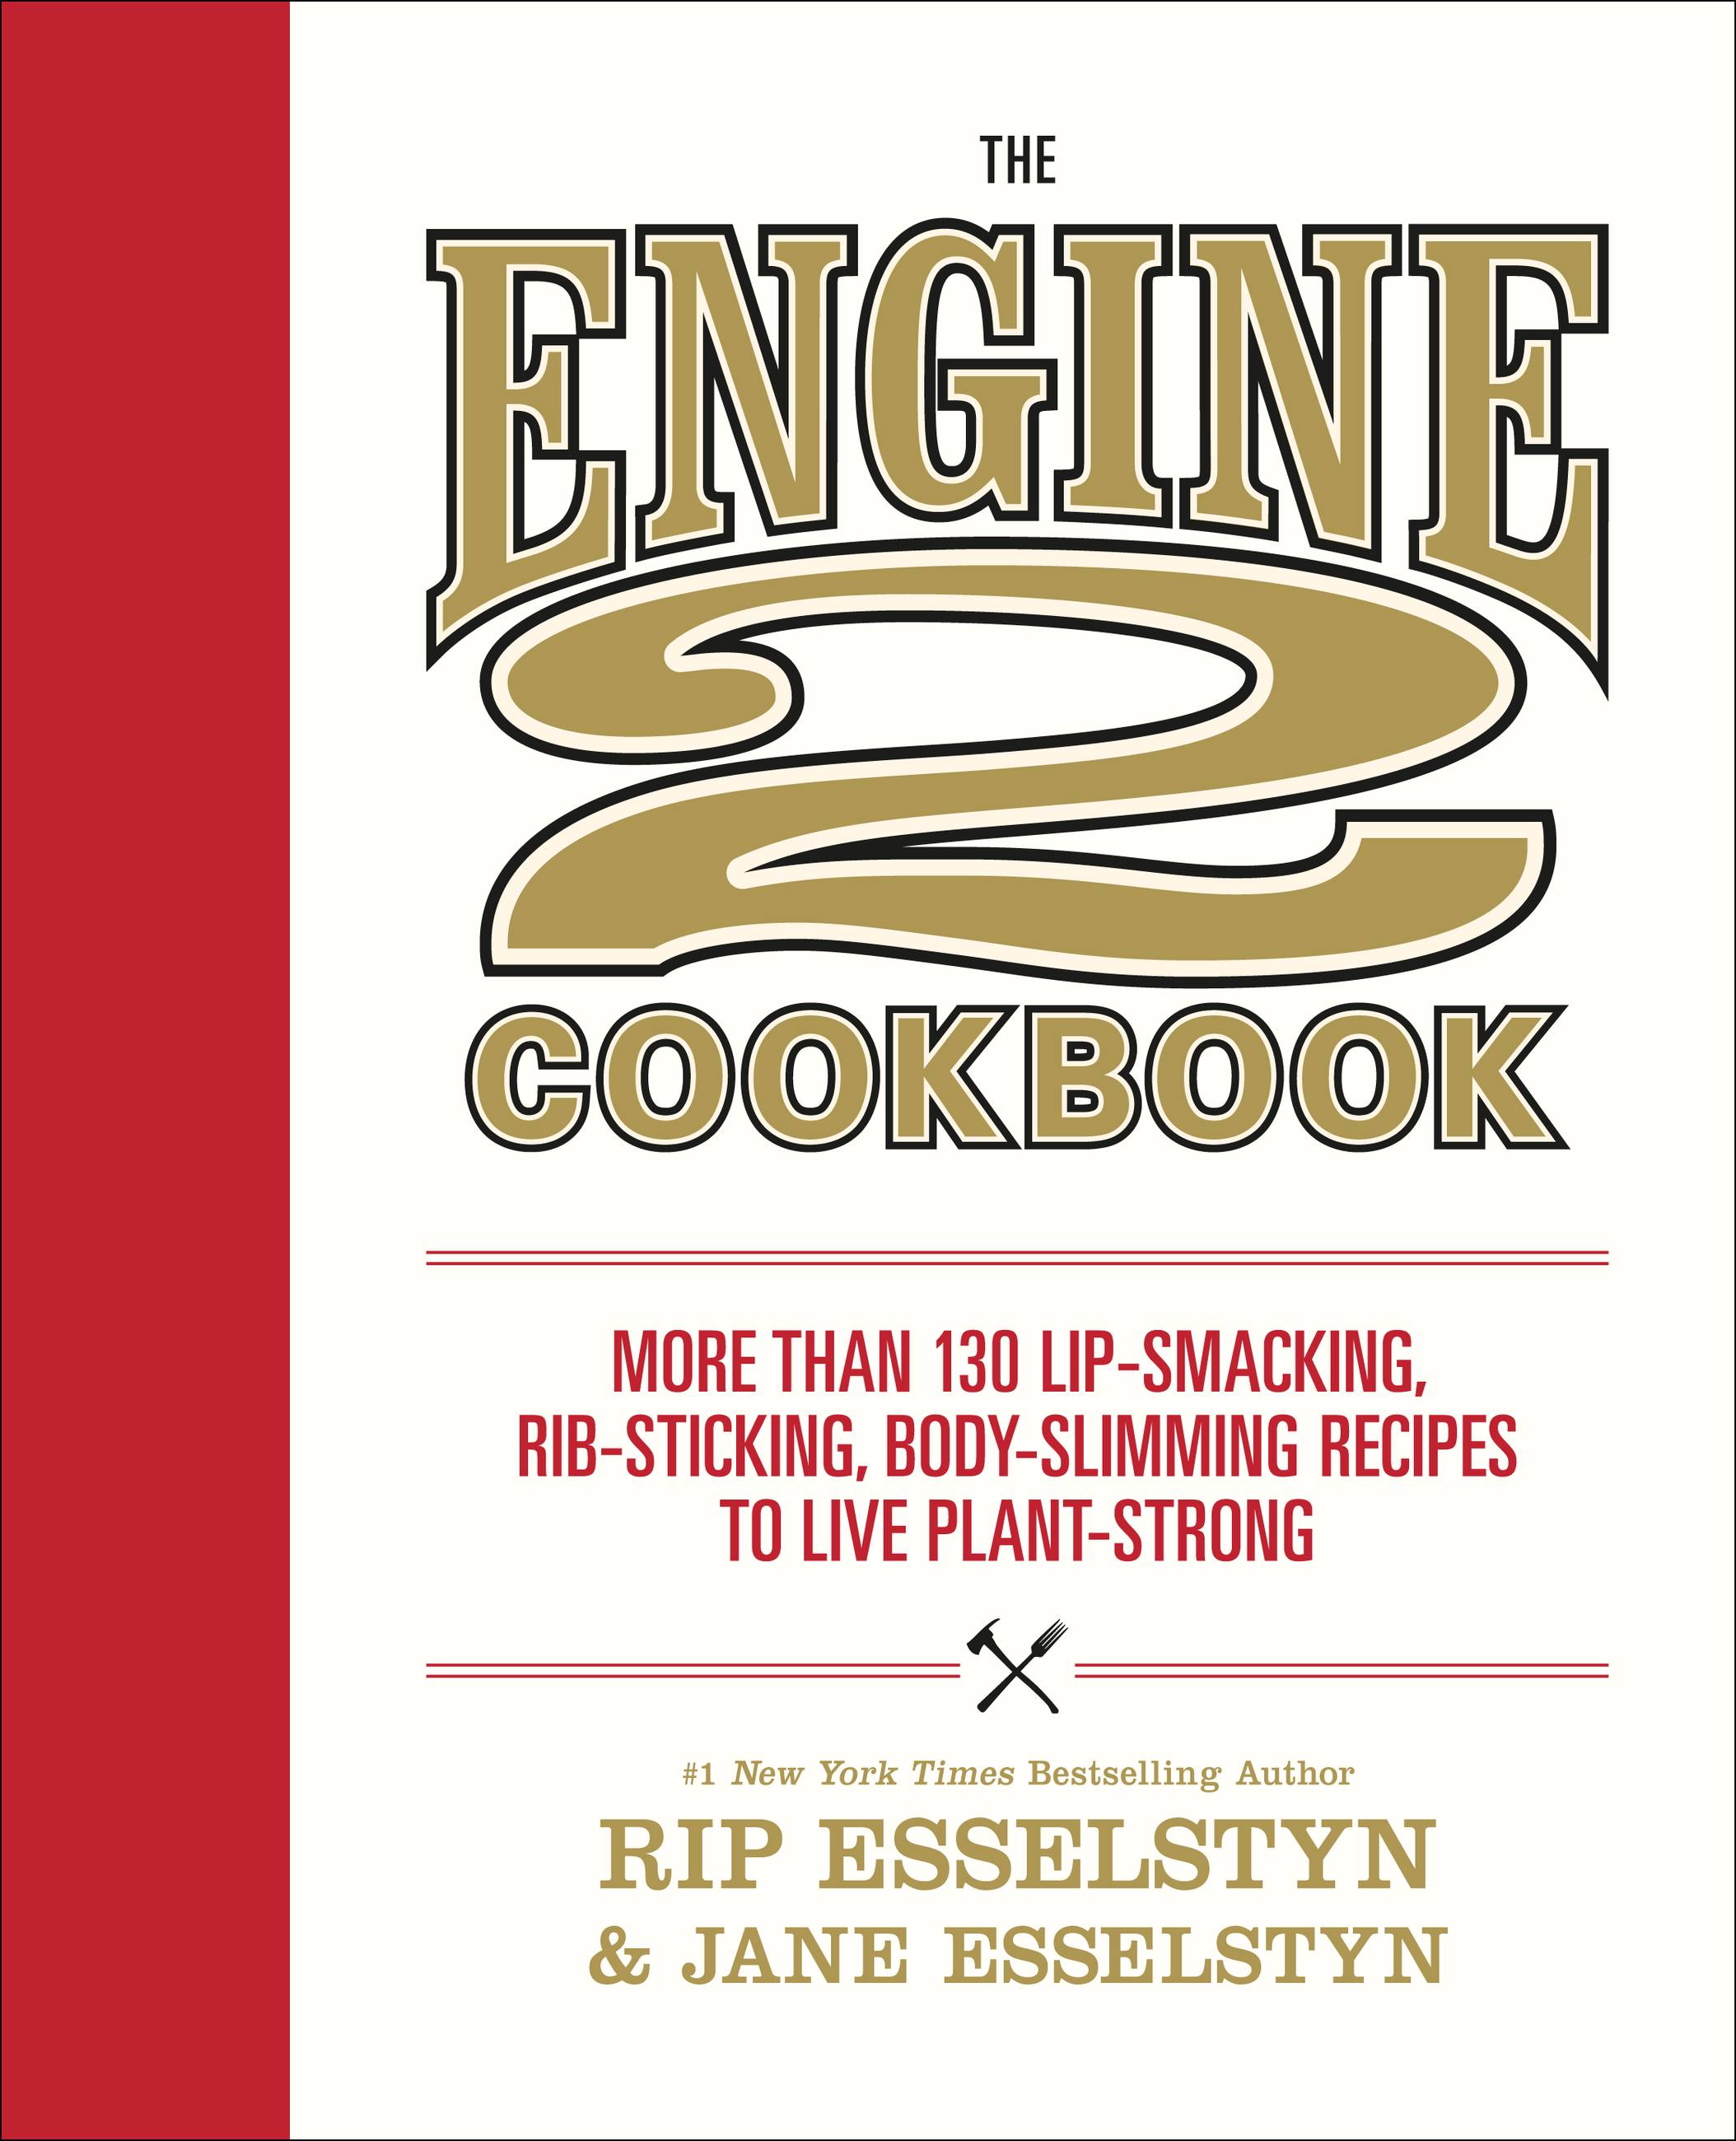 The Engine 2 Cookbook by Rip Esselstyn Hachette Book Group